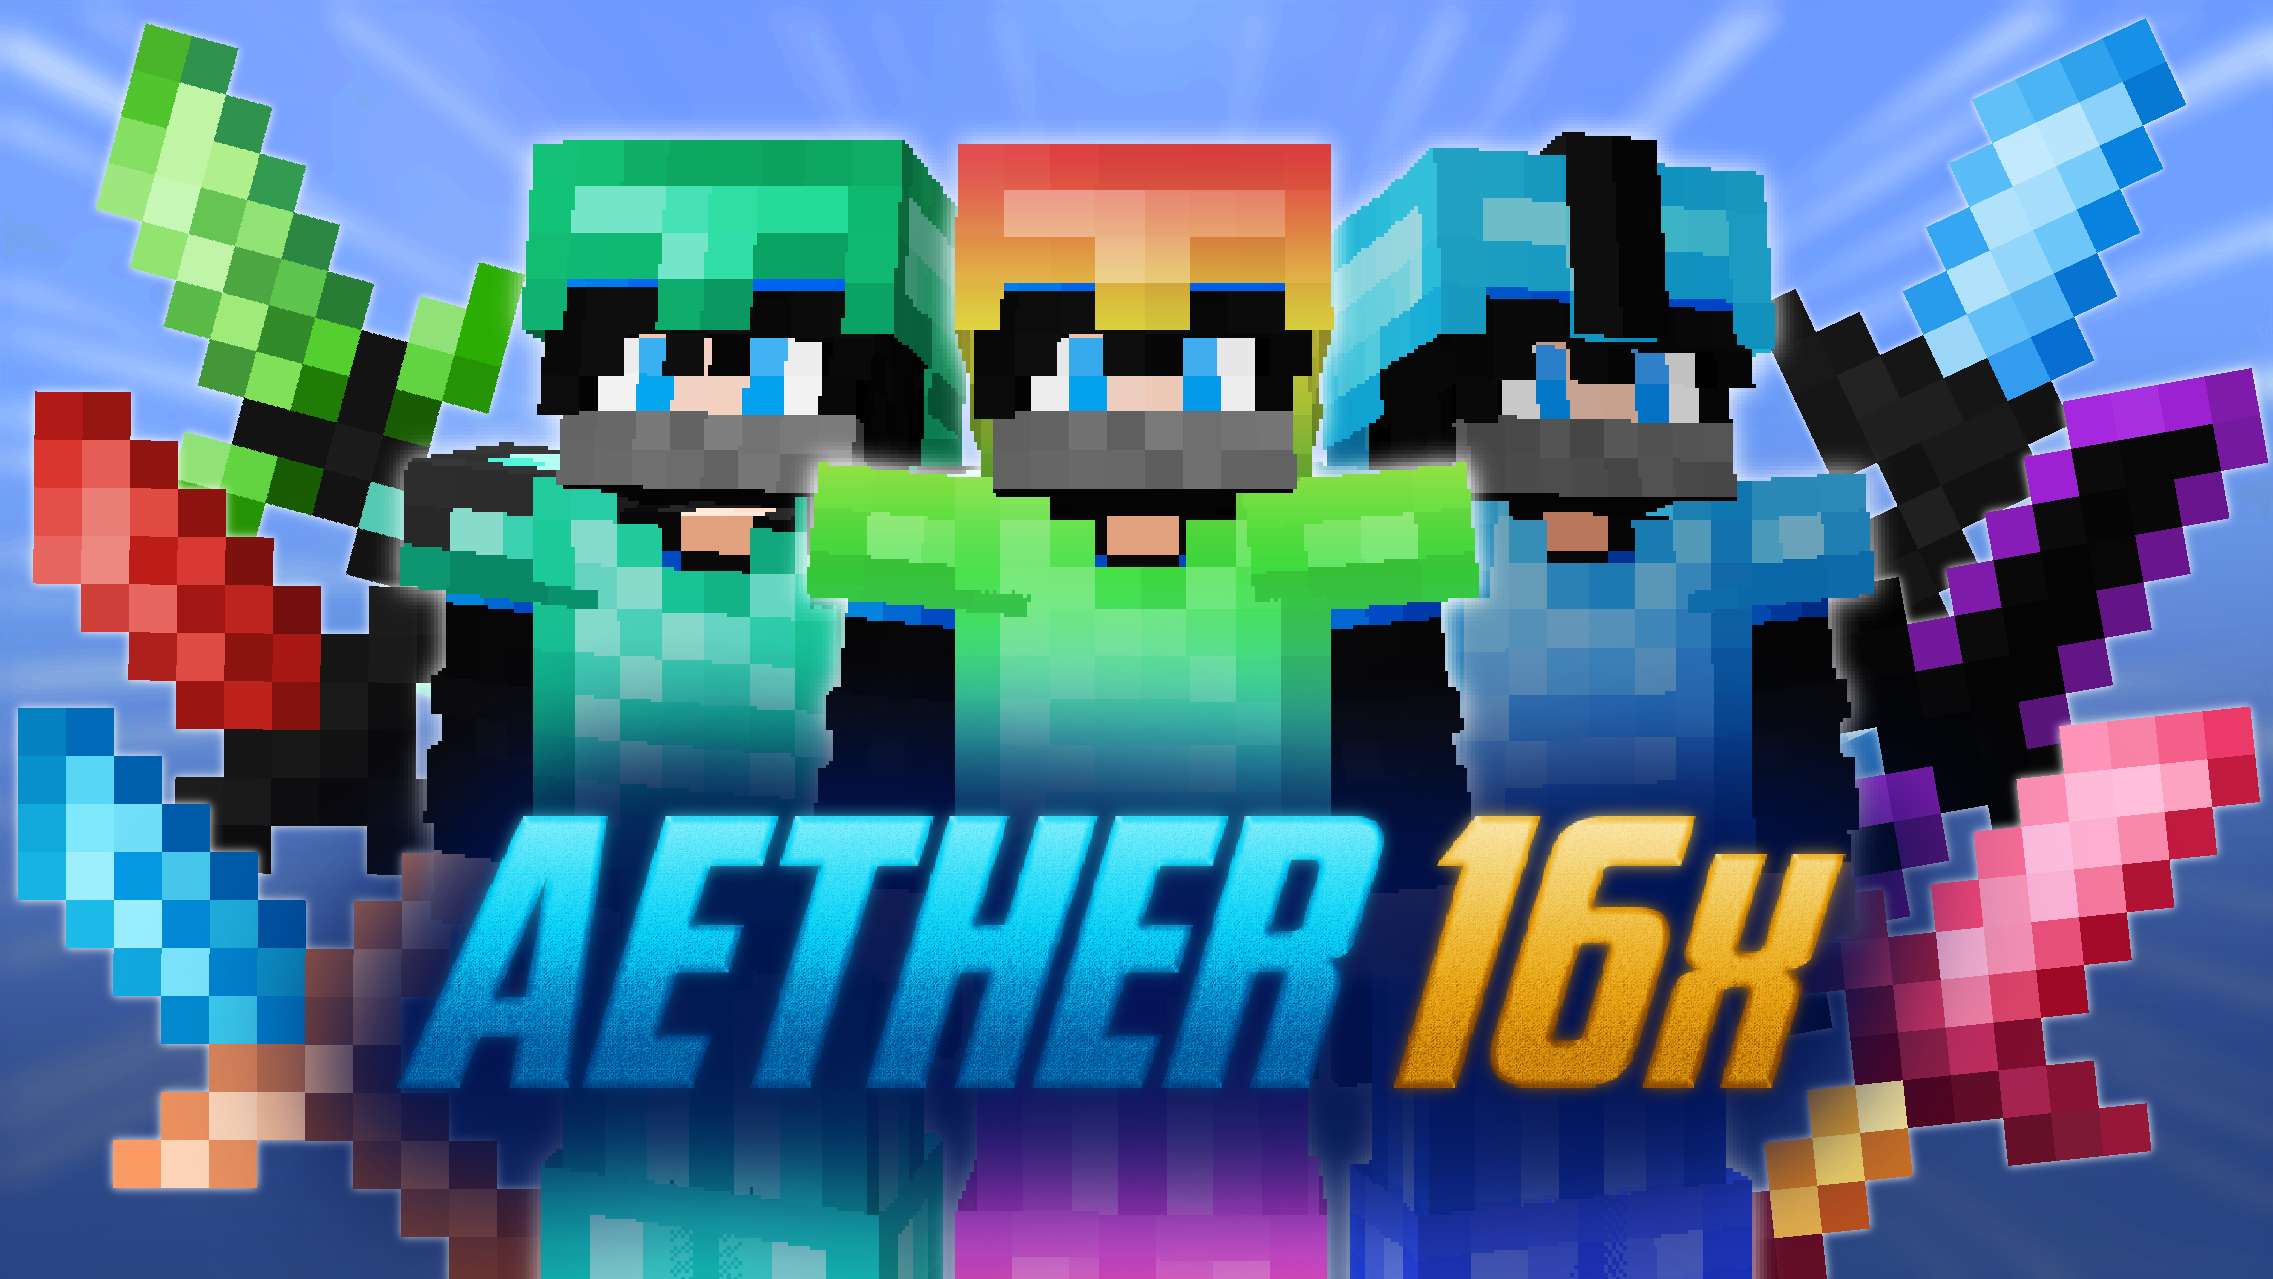 Aether 16x [Mixabletub] 16 by Mqryo on PvPRP